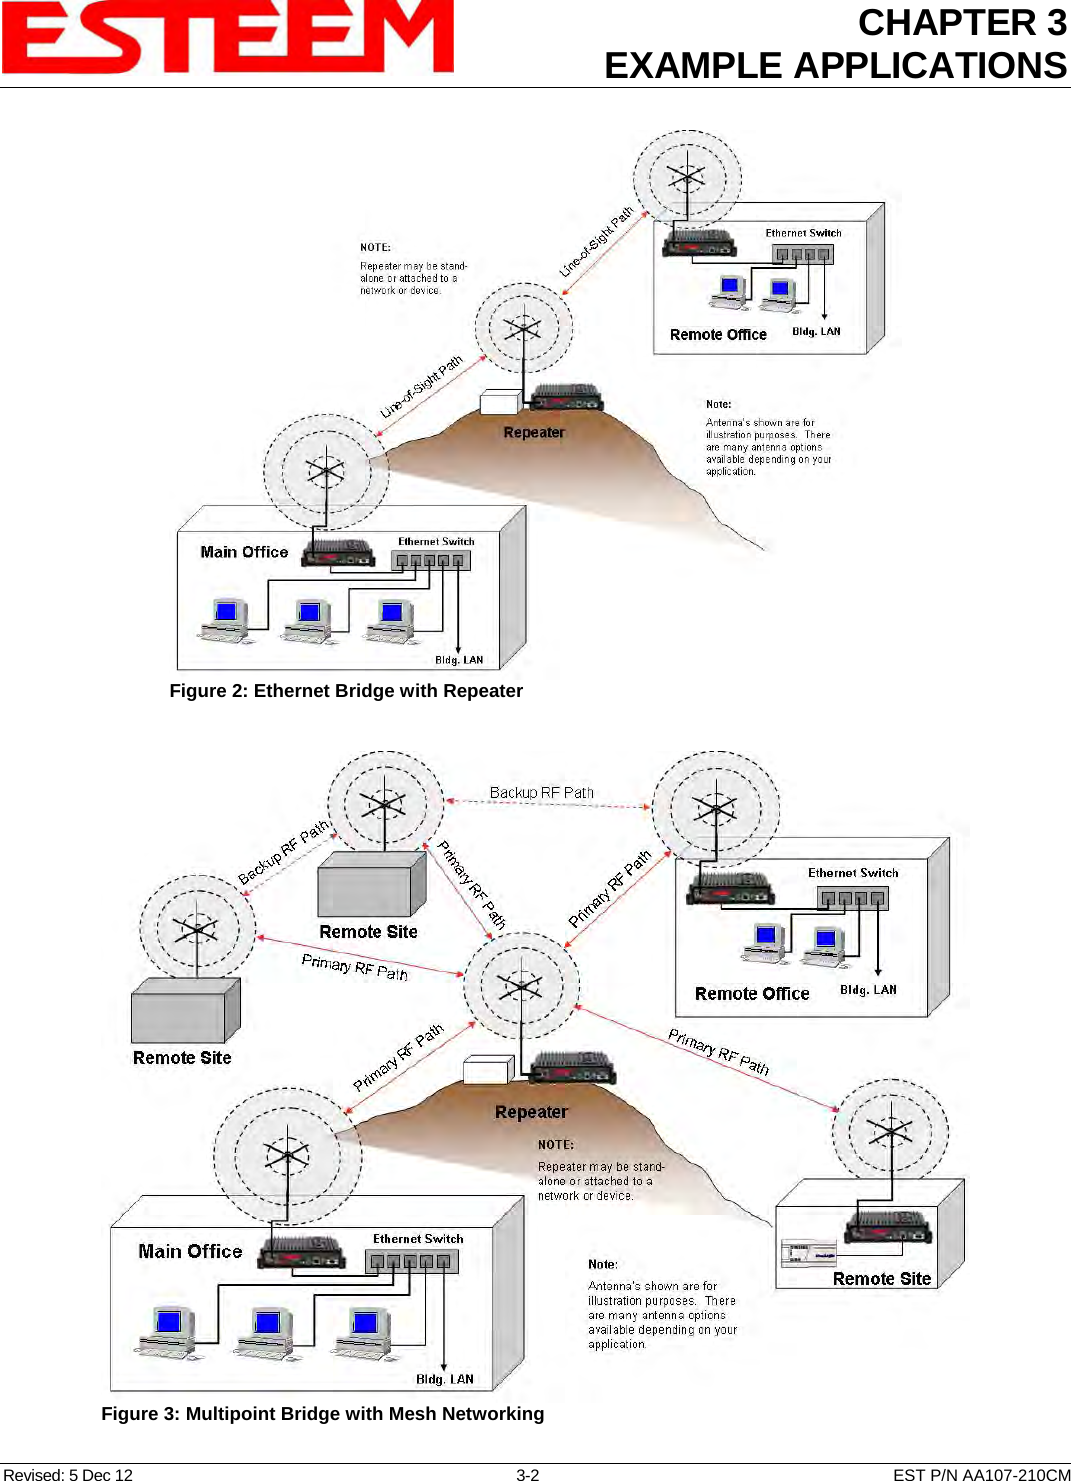 CHAPTER 3 EXAMPLE APPLICATIONS   Figure 2: Ethernet Bridge with Repeater   Figure 3: Multipoint Bridge with Mesh Networking  Revised: 5 Dec 12  3-2  EST P/N AA107-210CM 